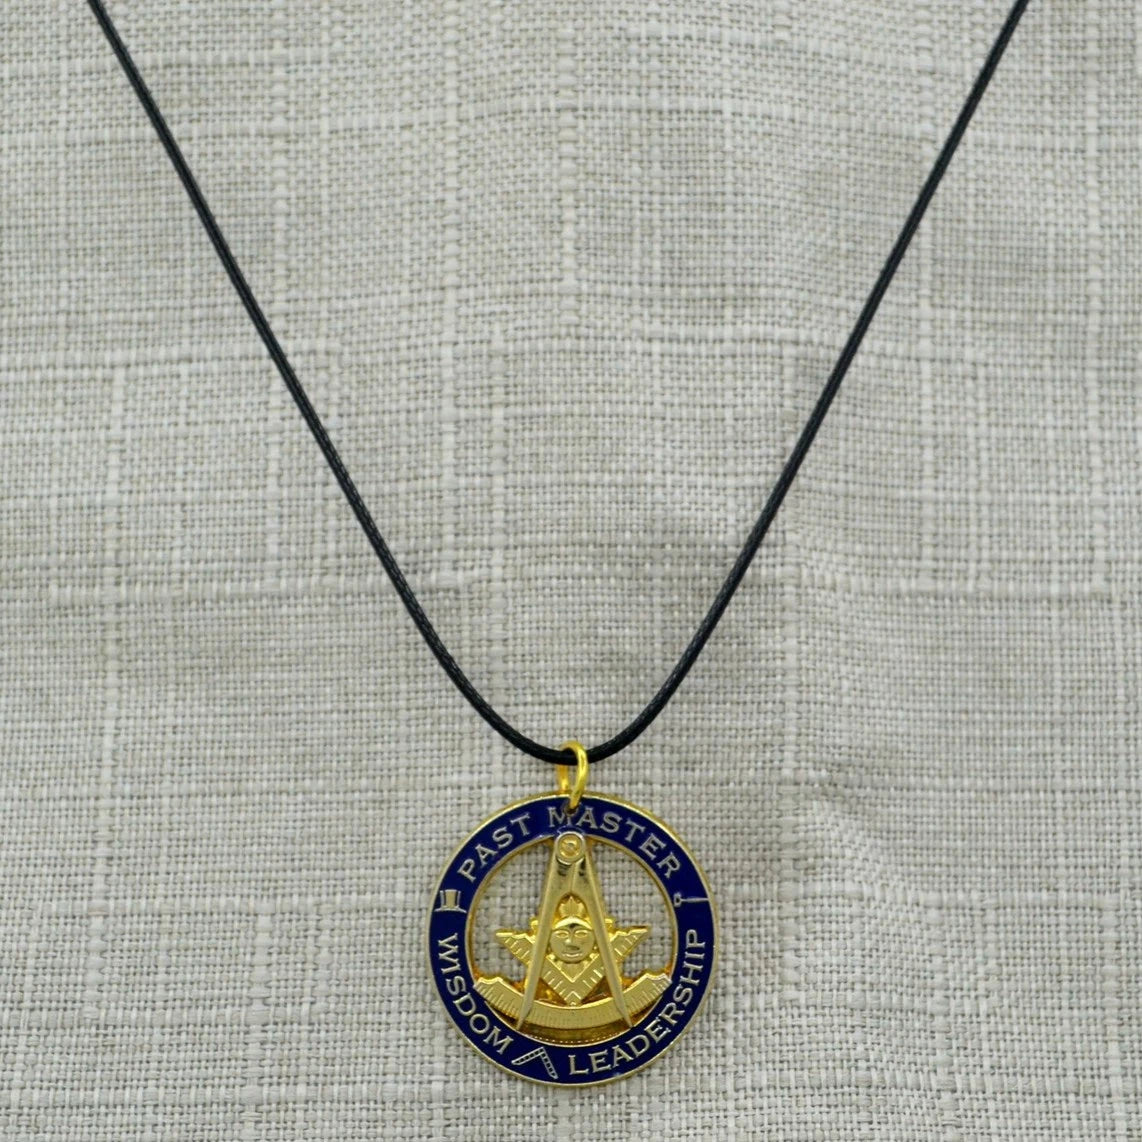 Past Master Blue Lodge Necklace - Gold Plated Wisdom & Leadership Pendant With Leather Chain